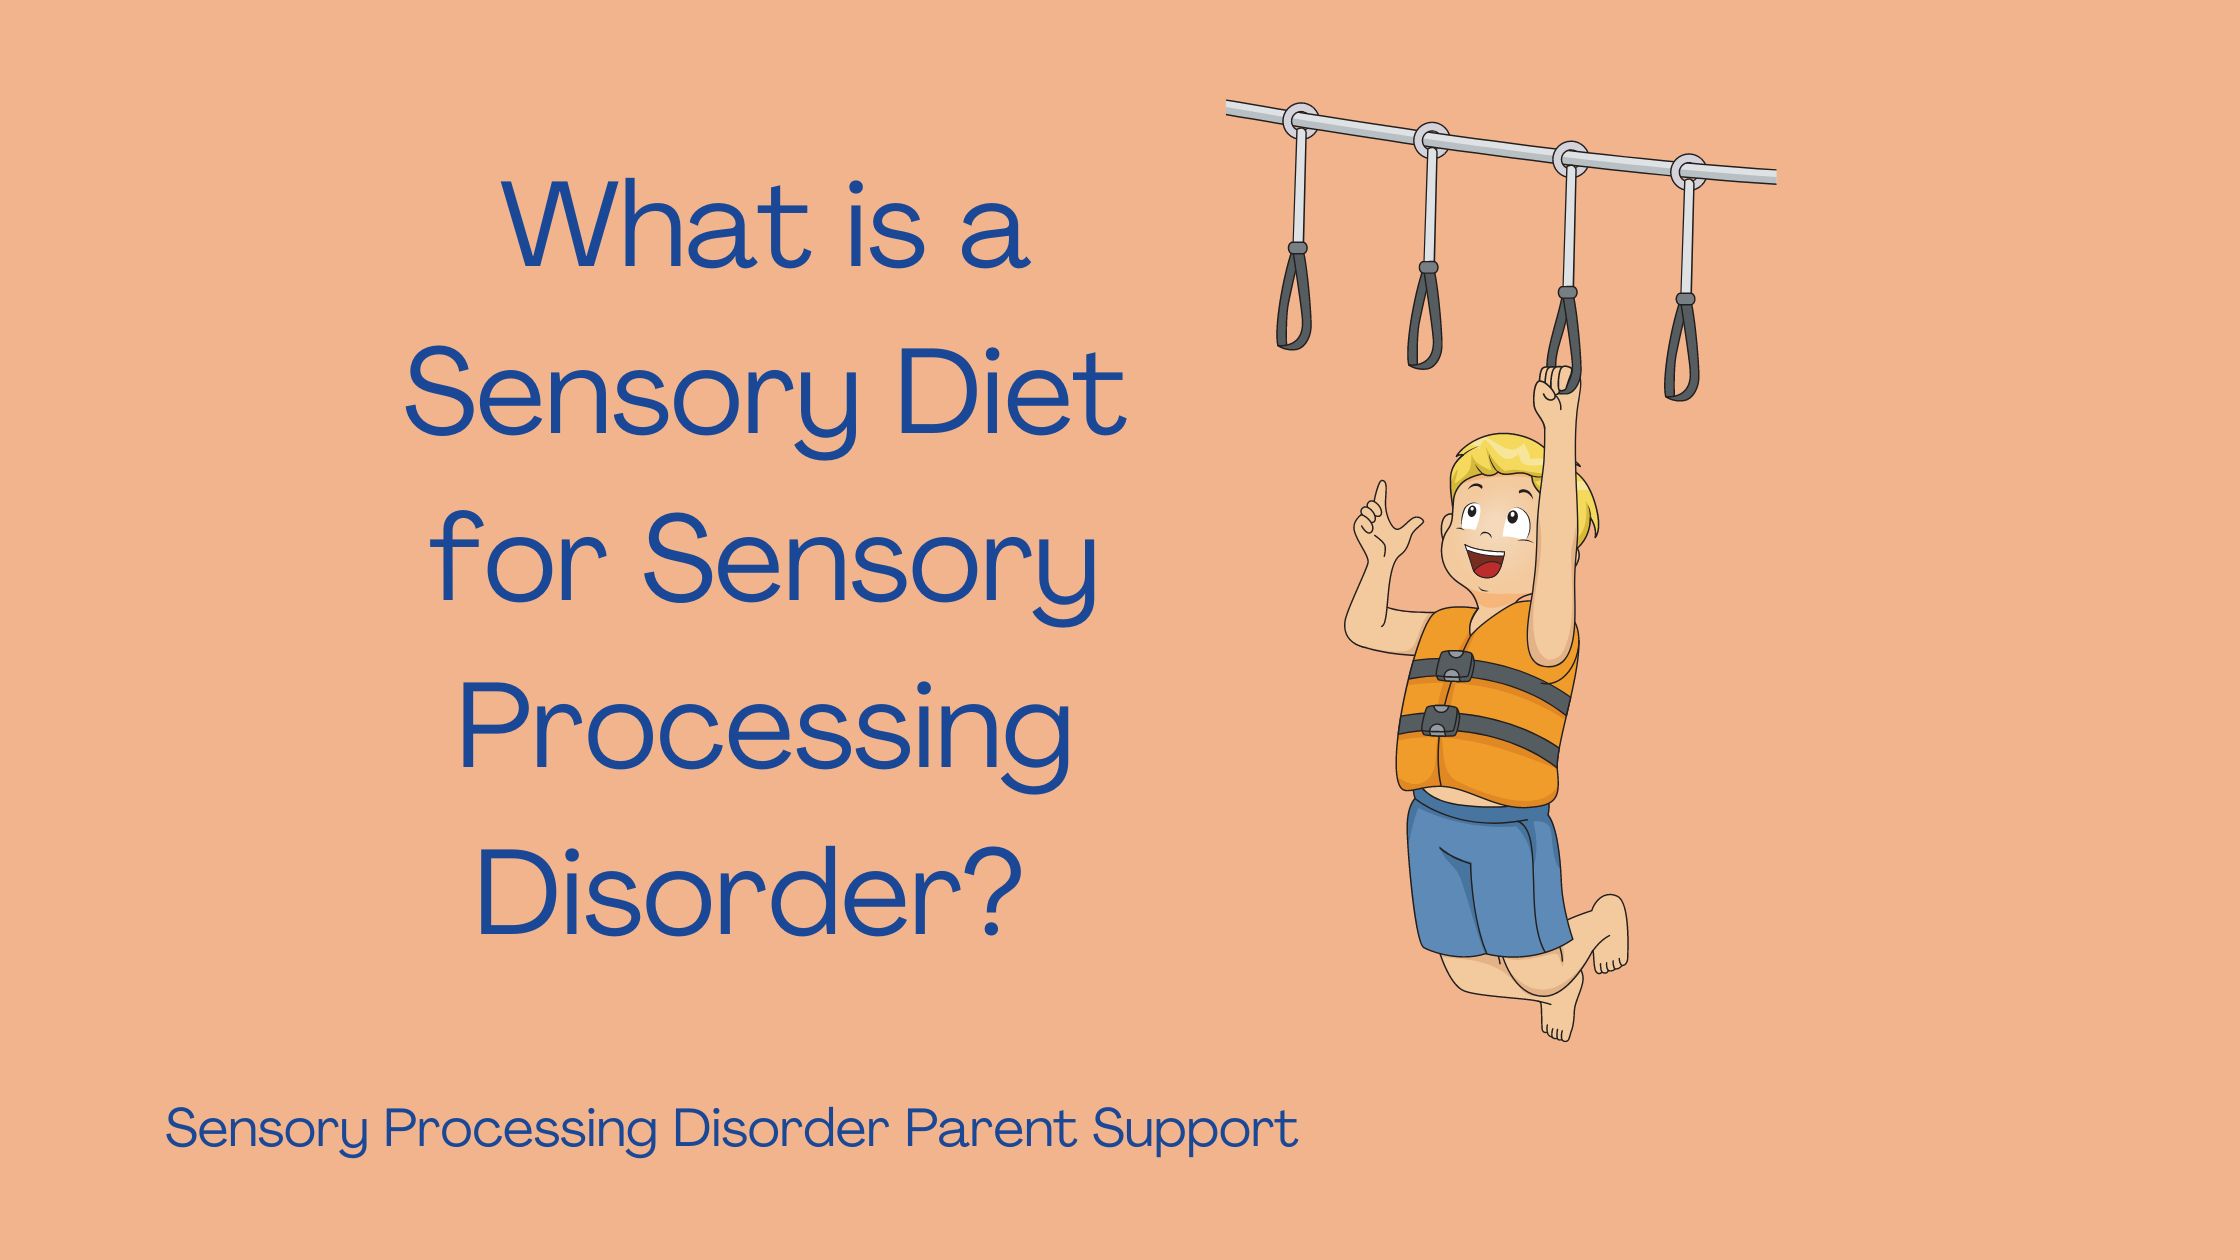 boy with sensory processing disorder playing on the playground What is a Sensory Diet for Sensory Processing Disorder?